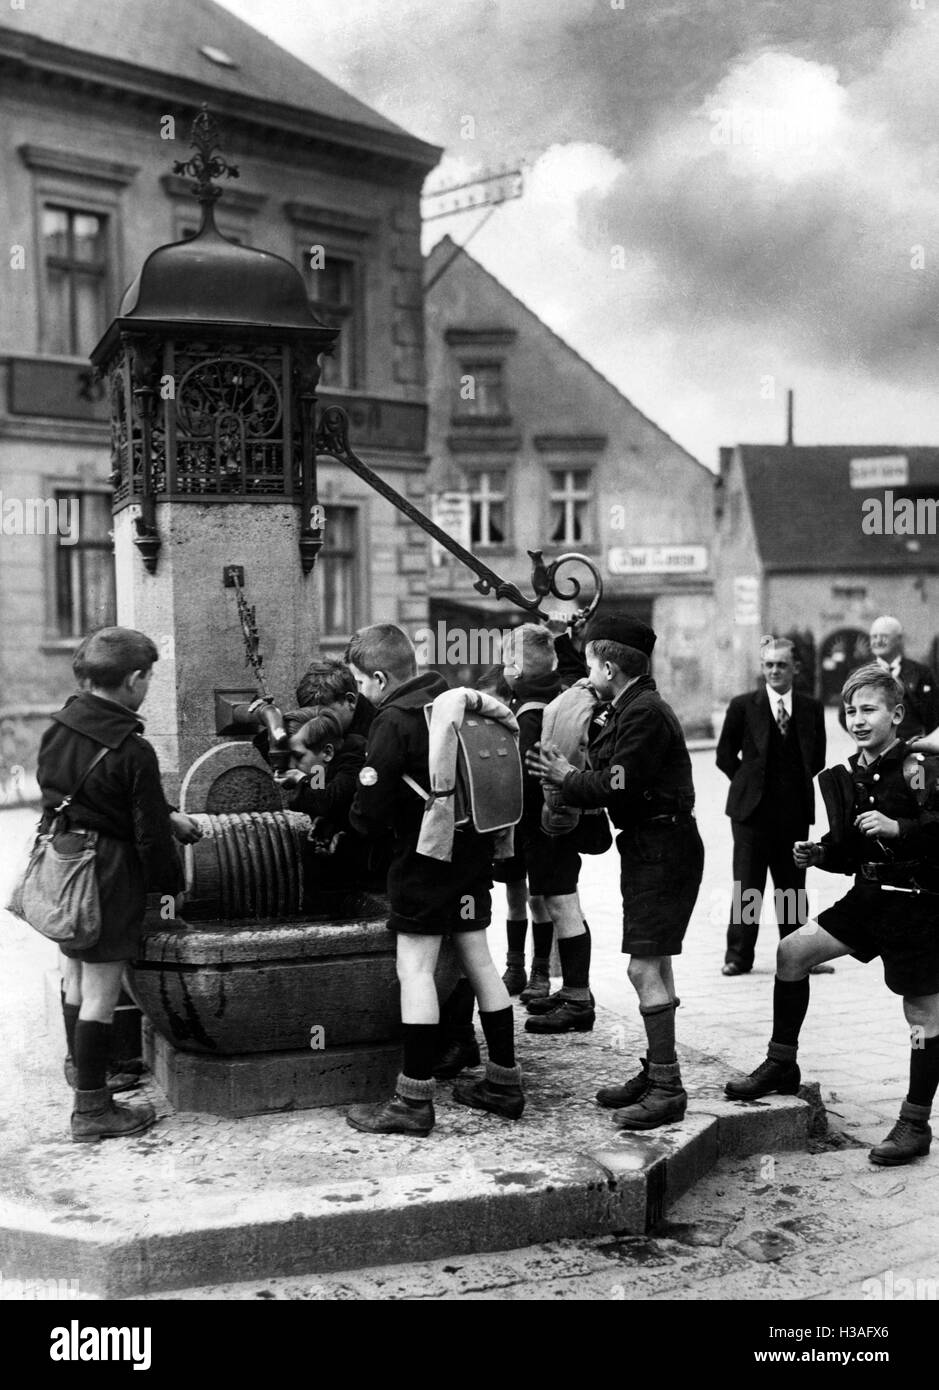 Members of the Deutsches Jungvolk at the village well, 1934 Stock Photo